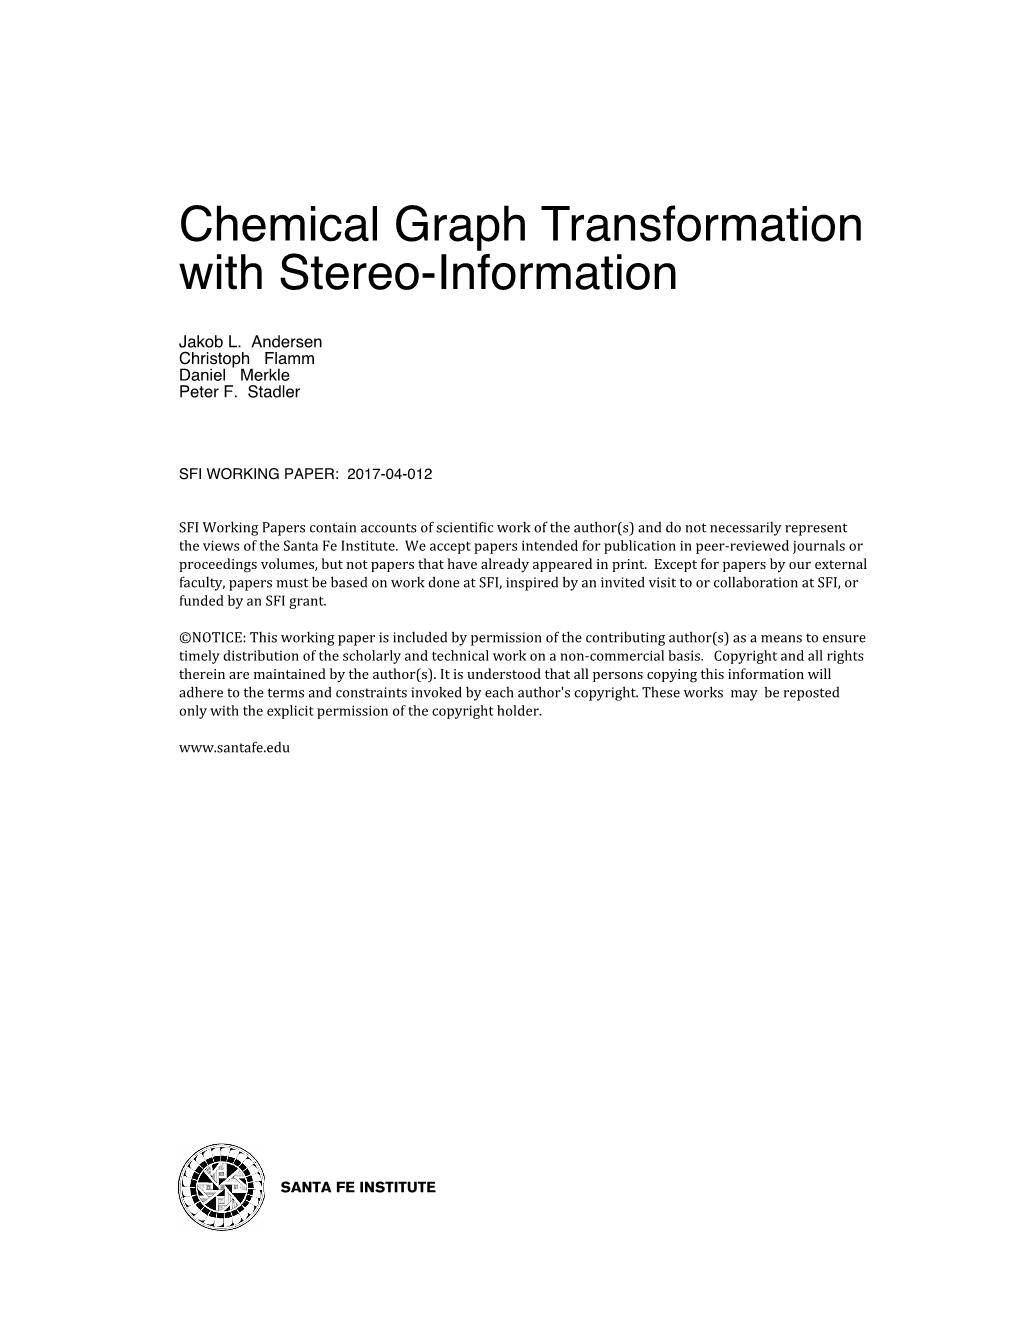 Chemical Graph Transformation with Stereo-Information